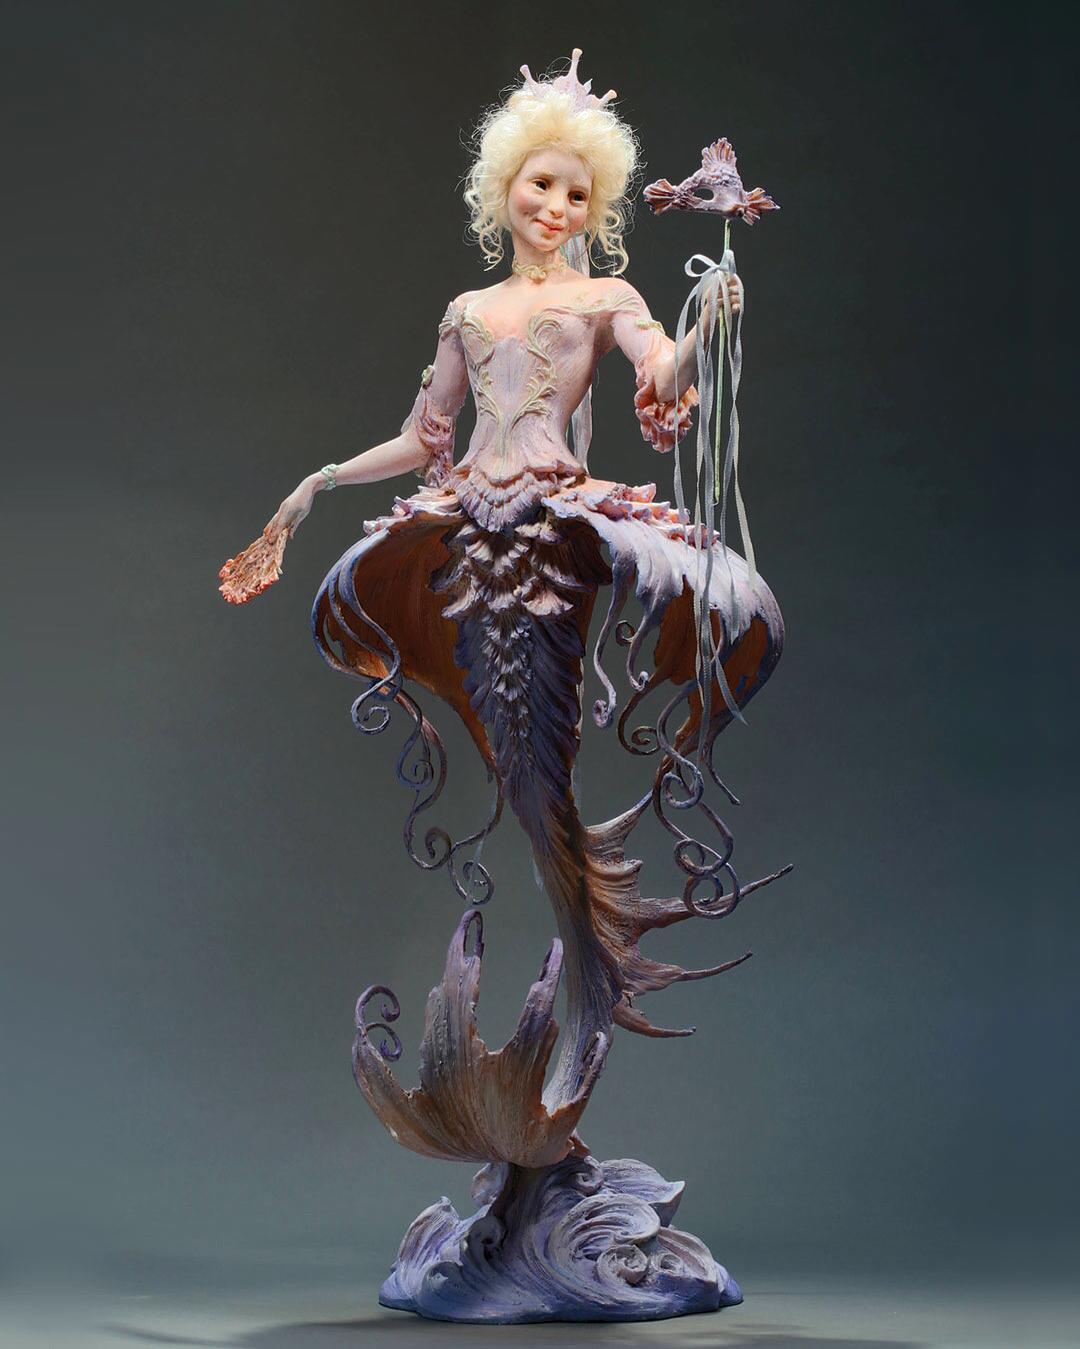 Magical Surreal And Allegorical Sculptures Of Fantastical Beings By Forest Rogers 22